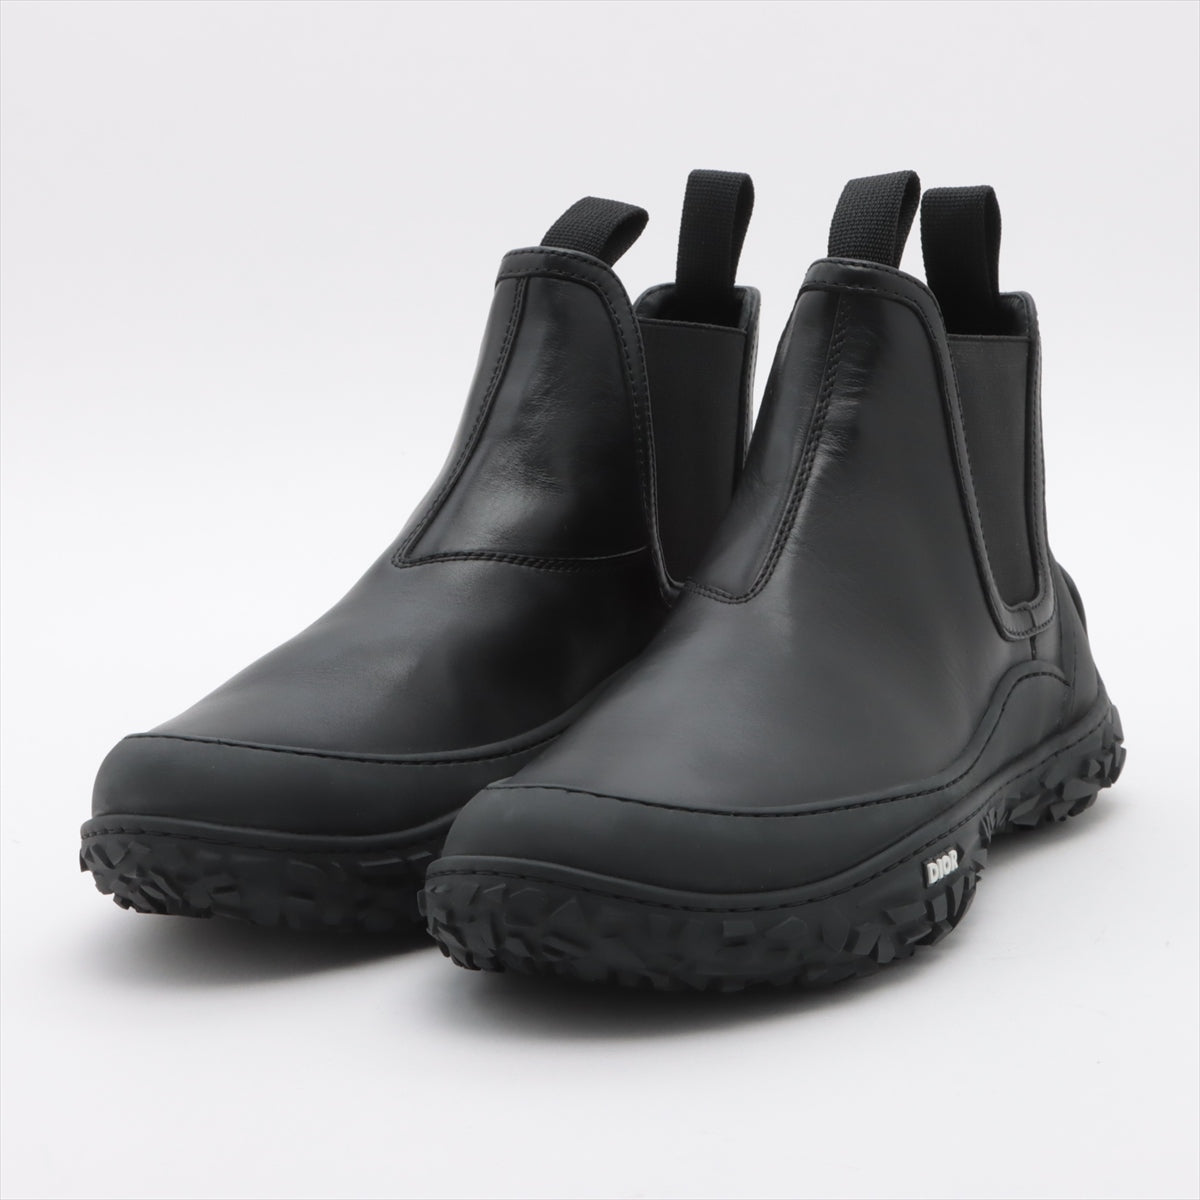 DIOR Calfskin Side Gore Boots 42 Men's Black LS0421 box There is a bag